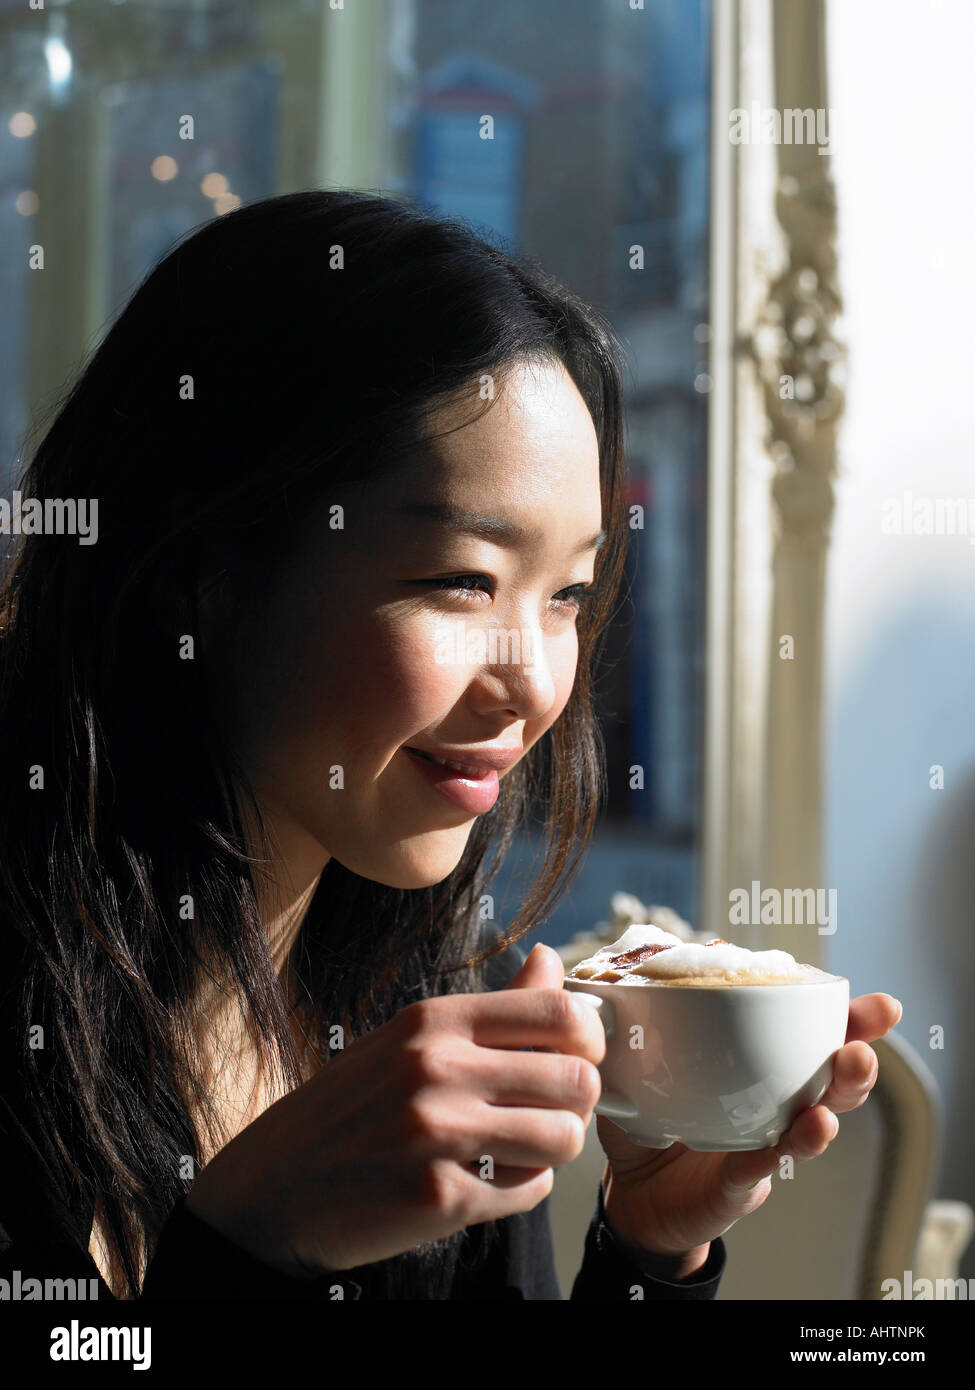 Young woman holding cappuccino, smiling, close-up Stock Photo